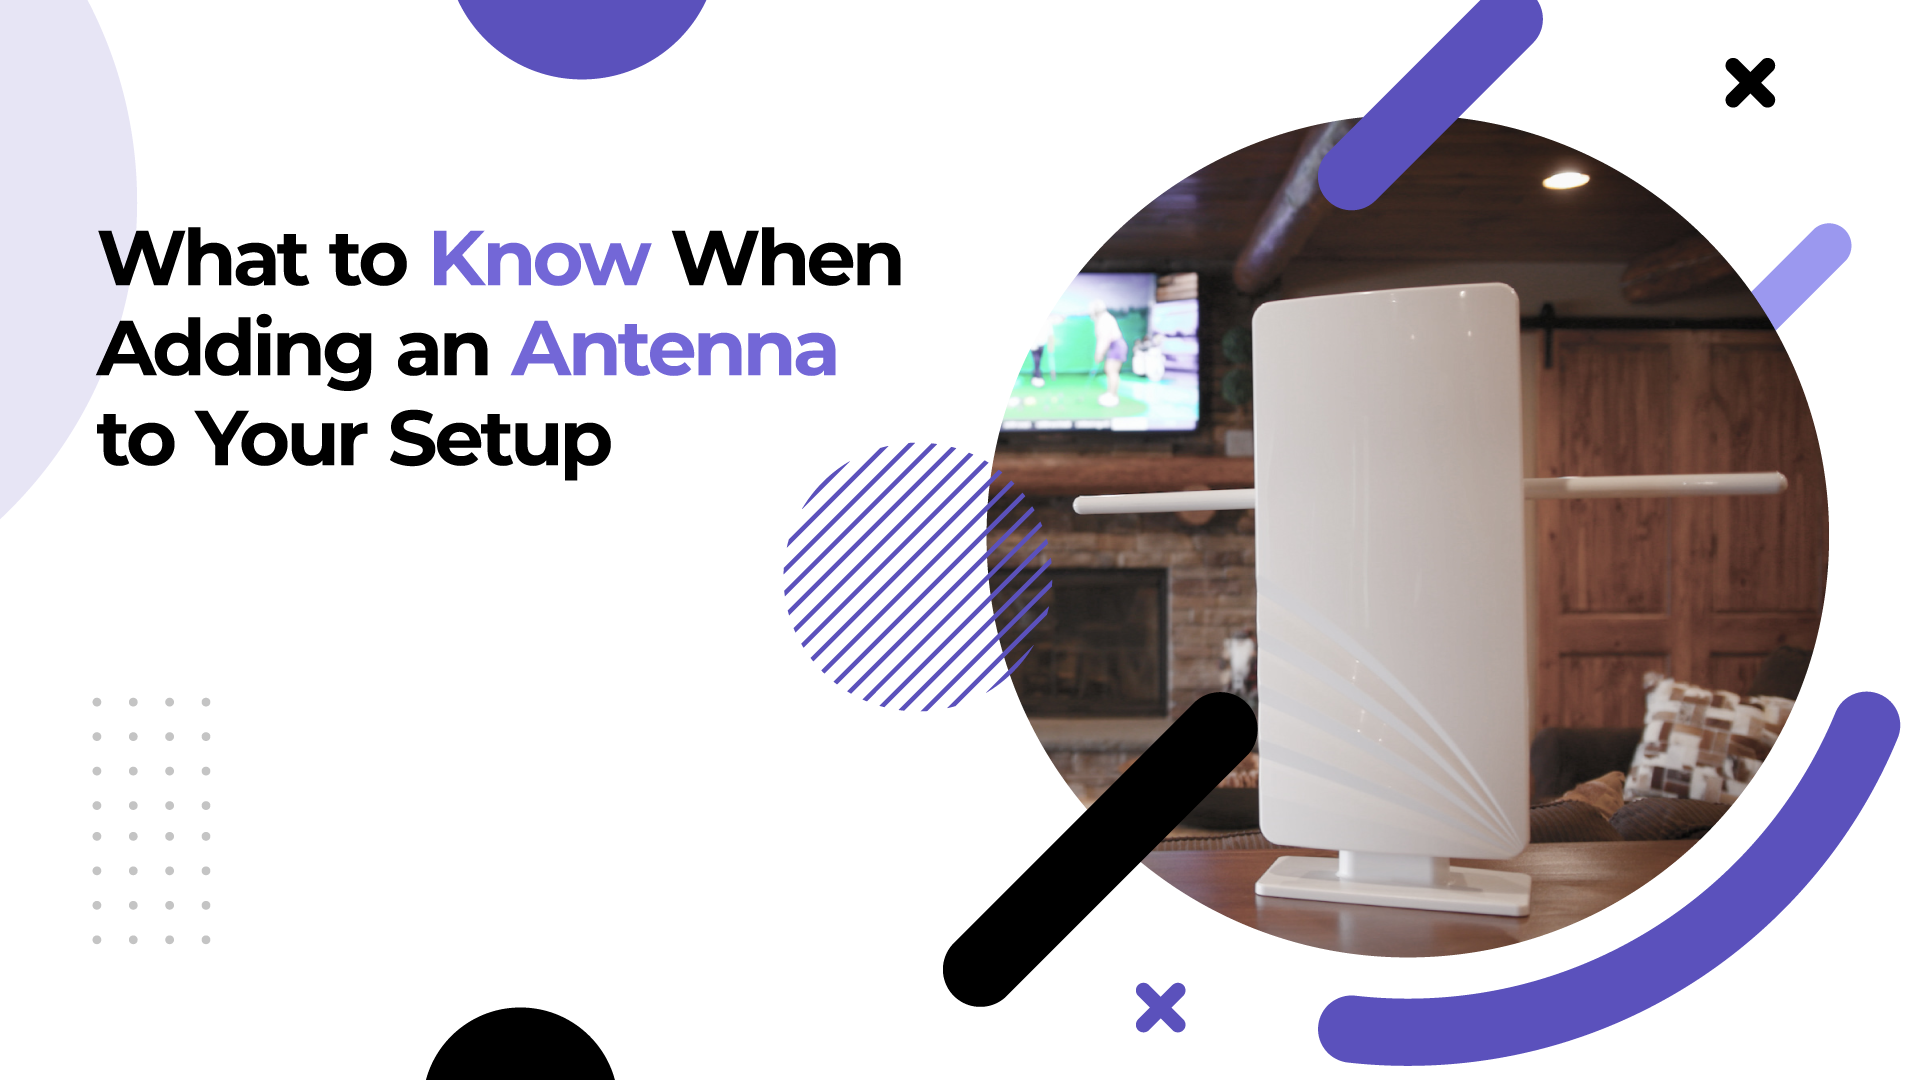 What to Know When Adding an Antenna to Your Setup